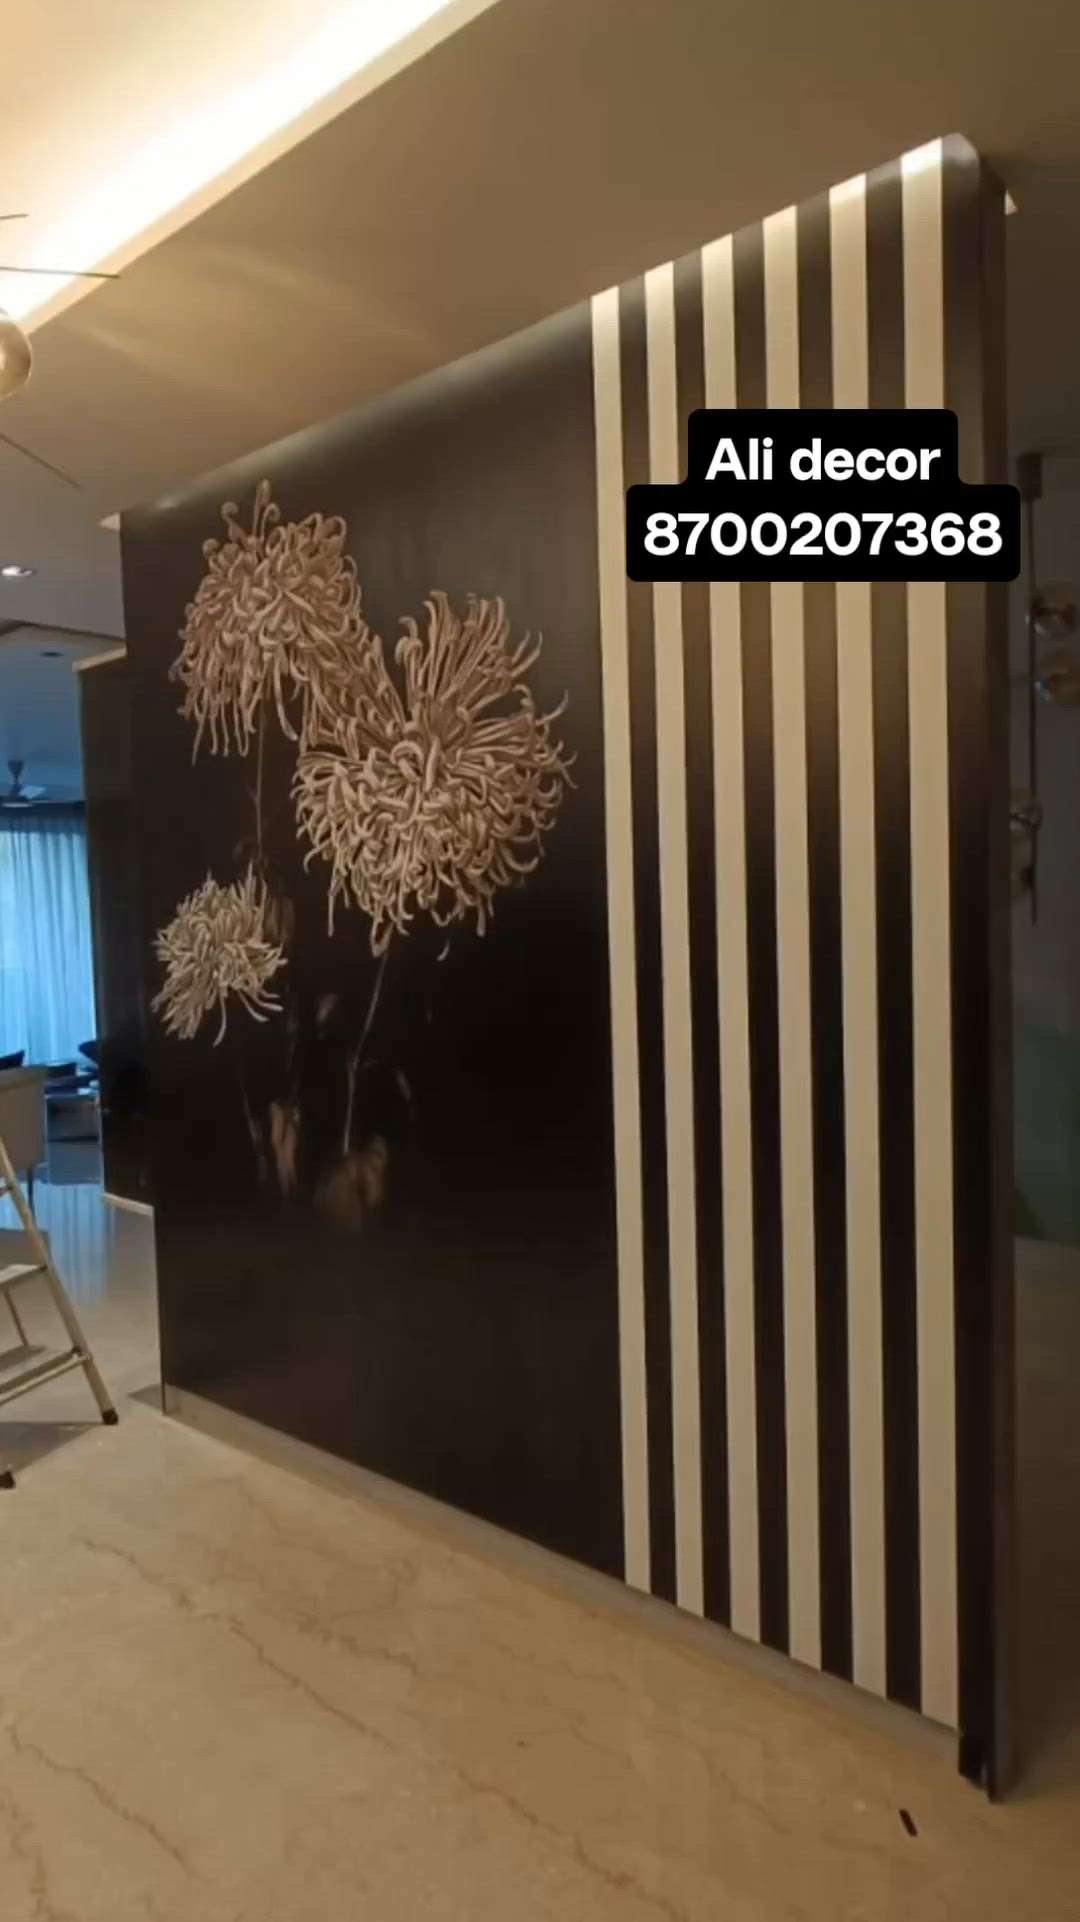 ✨A Beautiful Collection ✨ Make your Window Royal & Glorious with us. *ALI DECOR * WALLPAPER | WINDOW BLINDS | GLASS FILMS | FLOORING | CEILING l VERTICALS l GRASS l Embossed Wallpaper l Embossed Blind
Manufacturer 
💥Ali Decor💥
✨Wallpaper ✨
For Order/Enquiry 
Call :   9599040792. 8700207368
Whatsapp : 8700207368